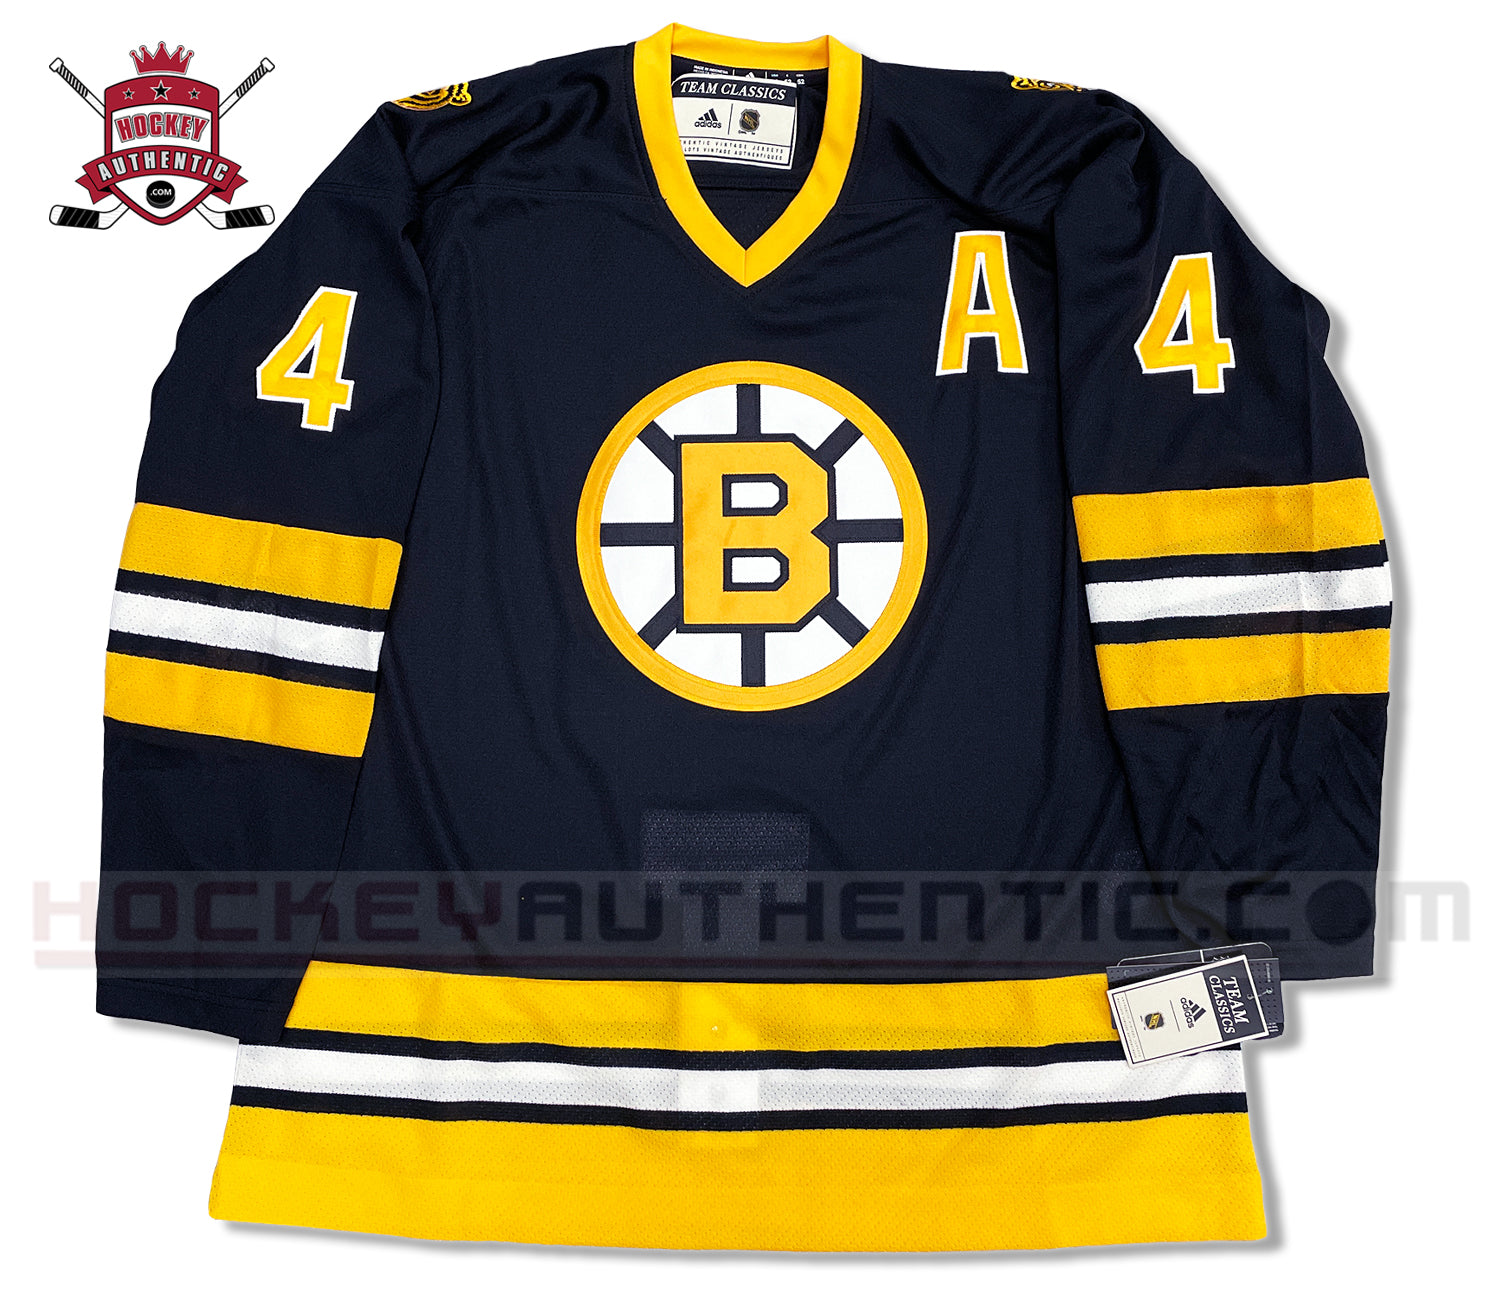 Bruins Winter Classic jersey Pro Shop orders in 2023